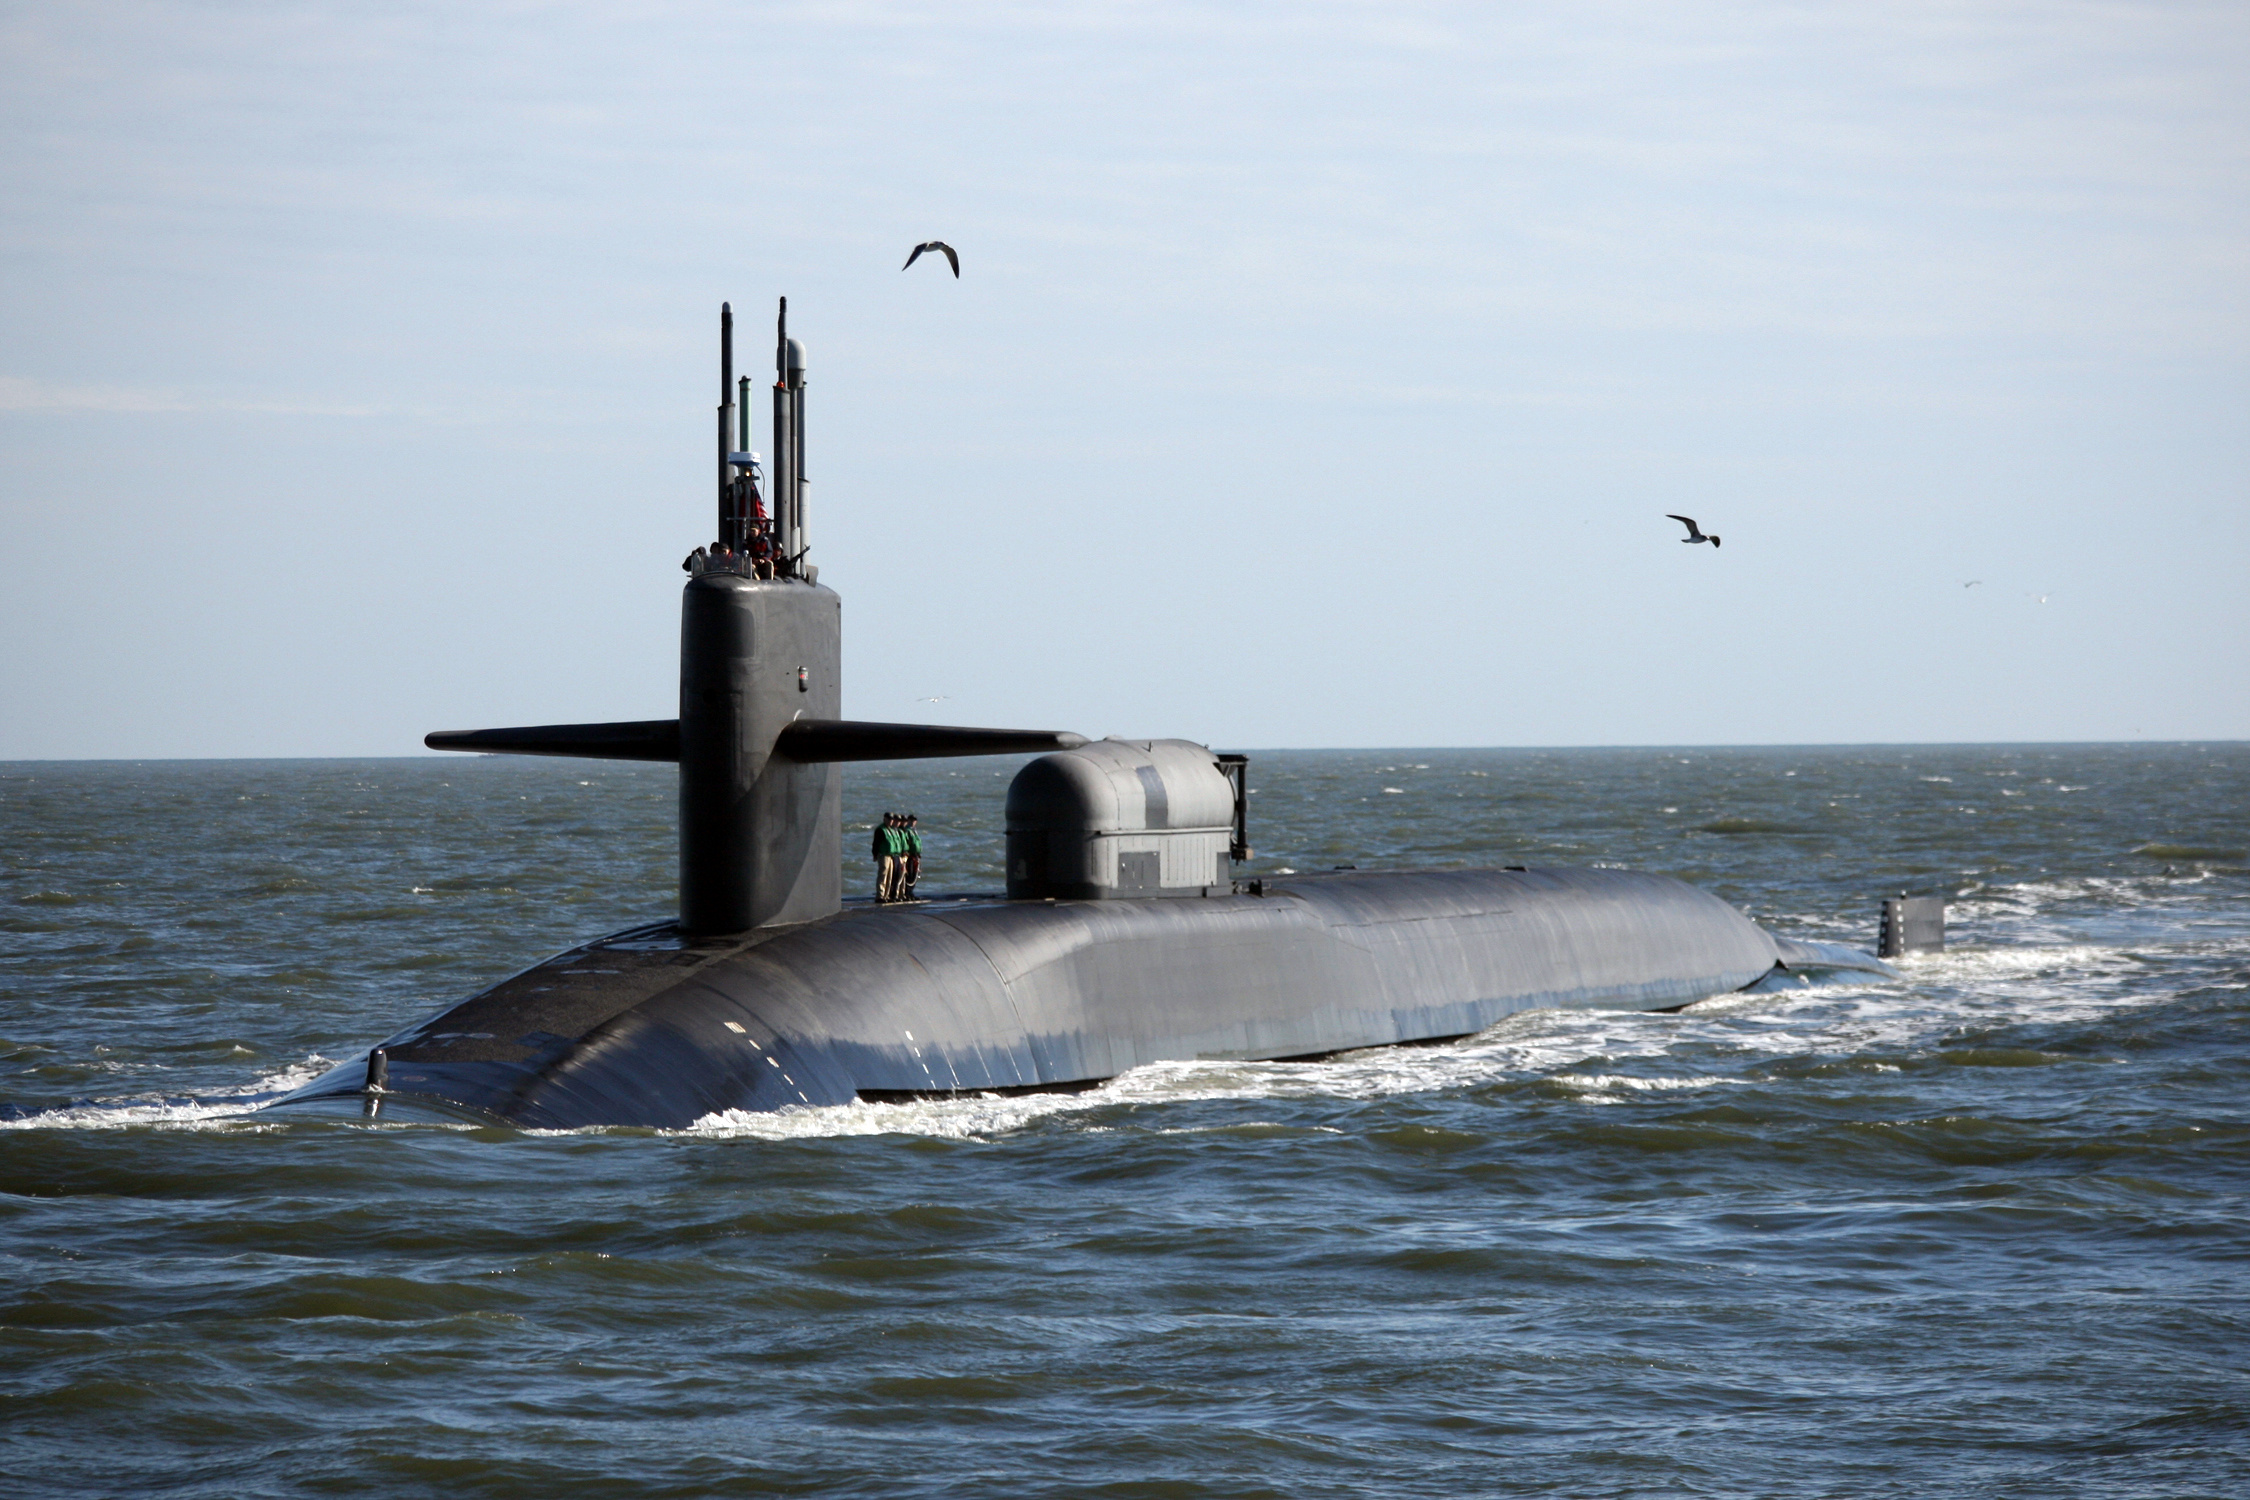  georgia extension nuclear submarine military navy wallpaper background 2250x1500